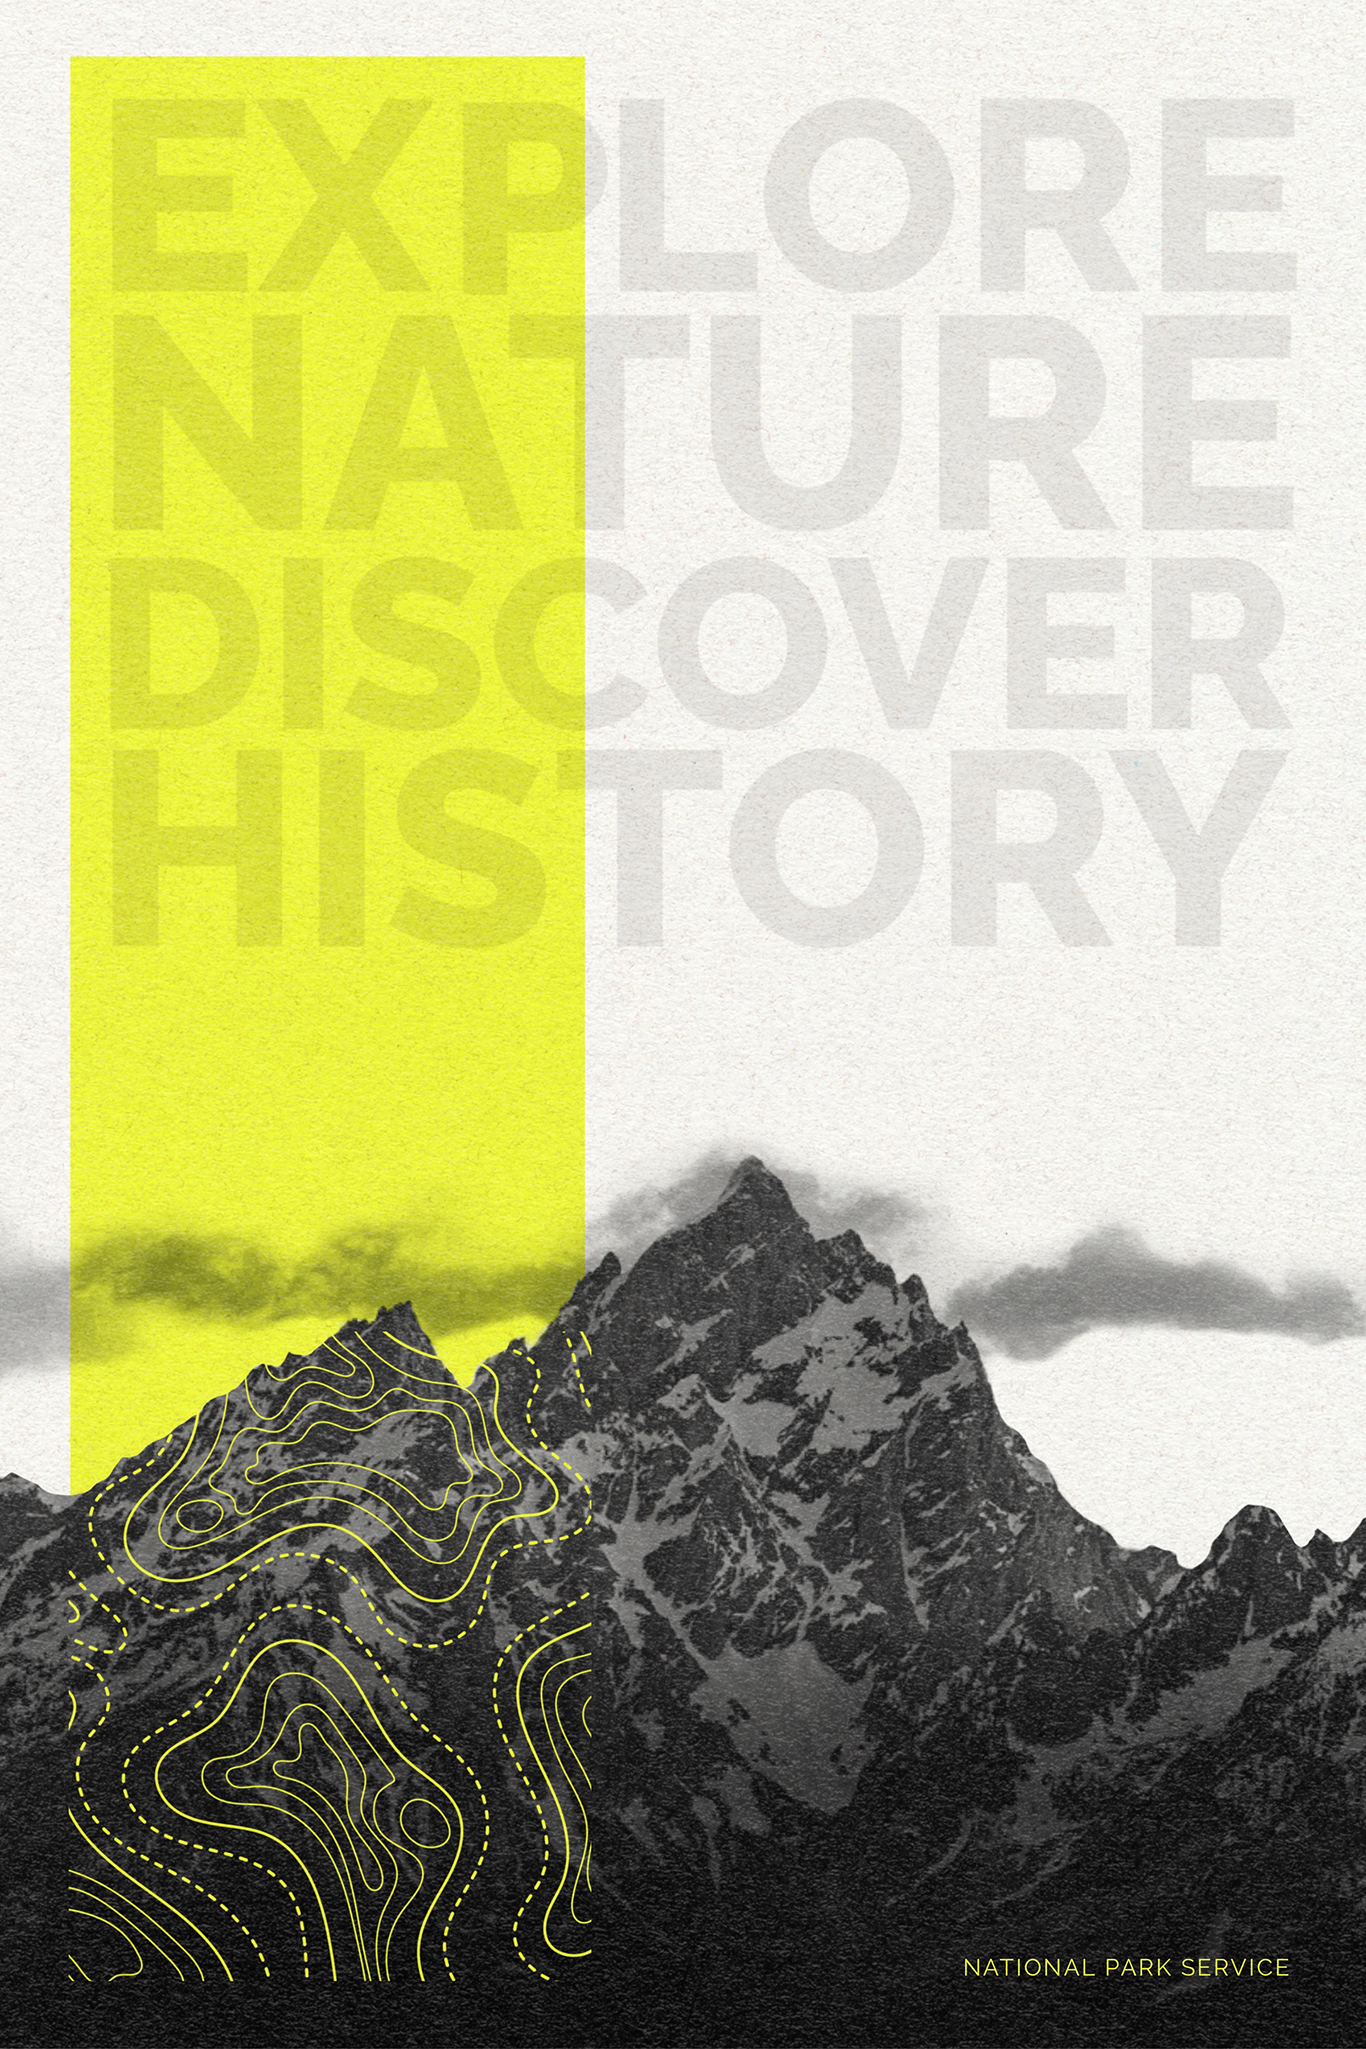 A gray poster with a black and white image of mountain peaks with a yellow color illustration of topography and dark gray text that reads “Explore nature discover history”.